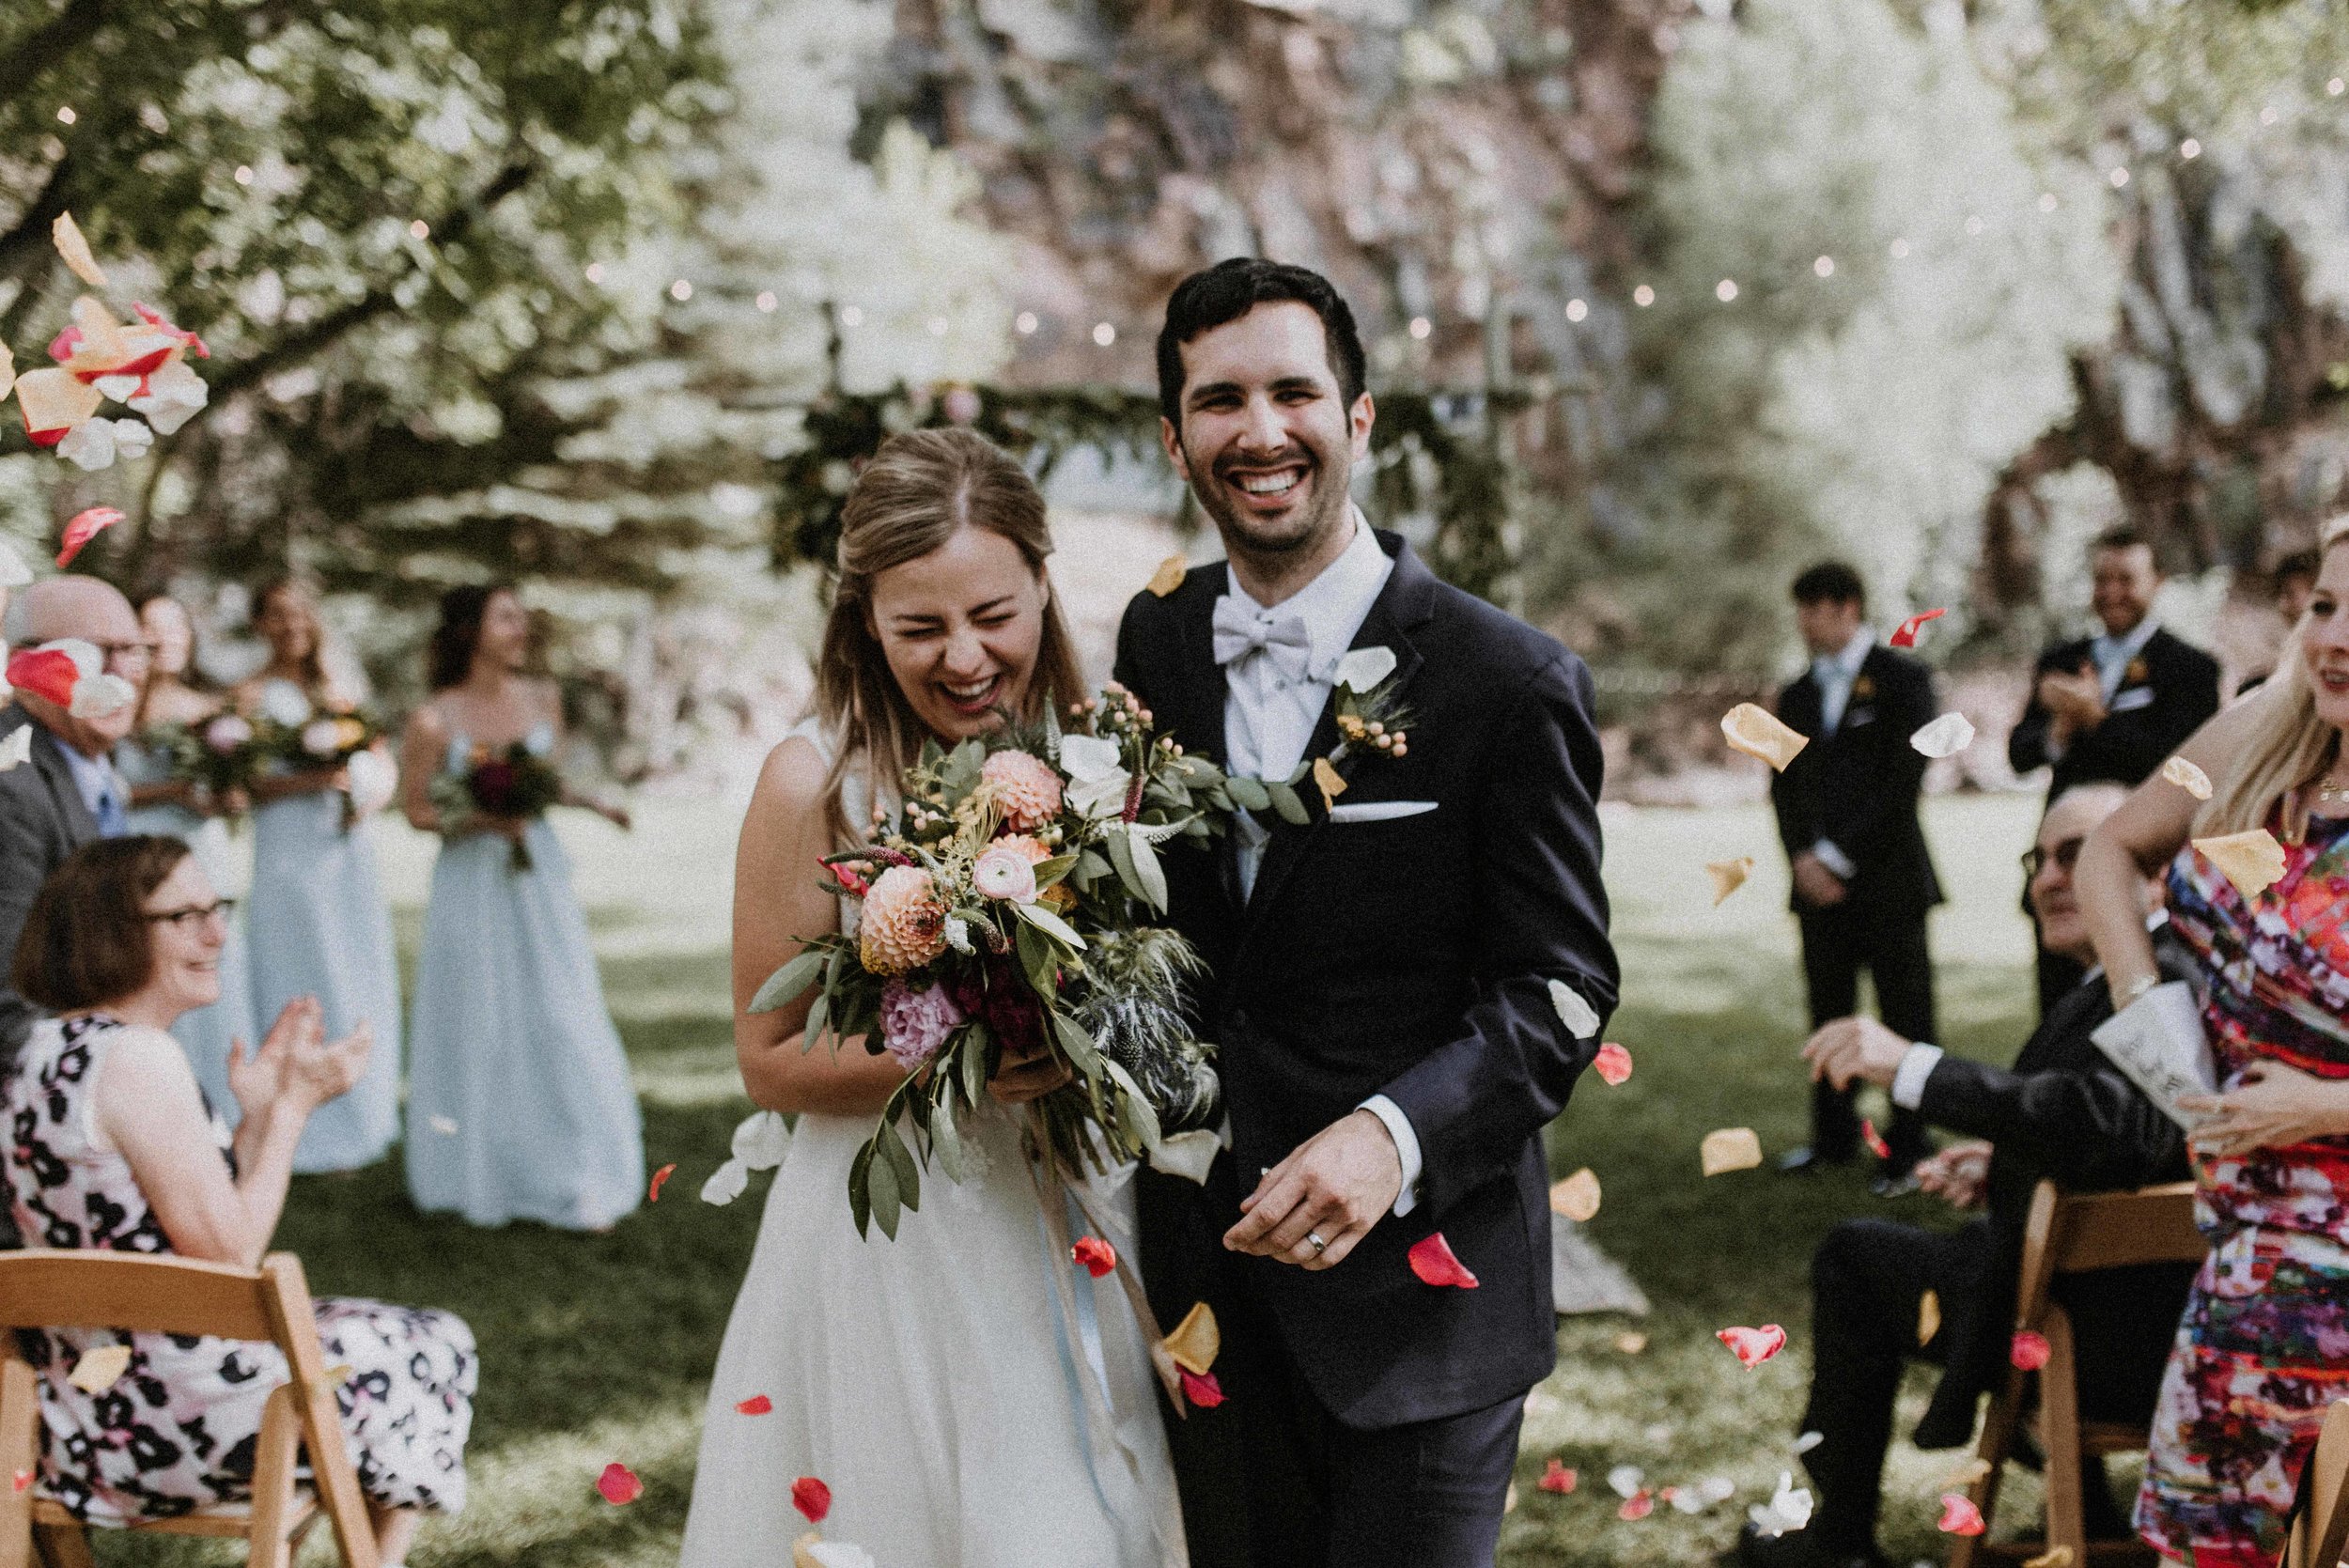  Meghan takes seriously beautiful images that capture the magic and feeling of the moment. Her images speak for themselves. What is a little harder to get a sense for through her portfolio is just how personable, professional, and delightful she is. 